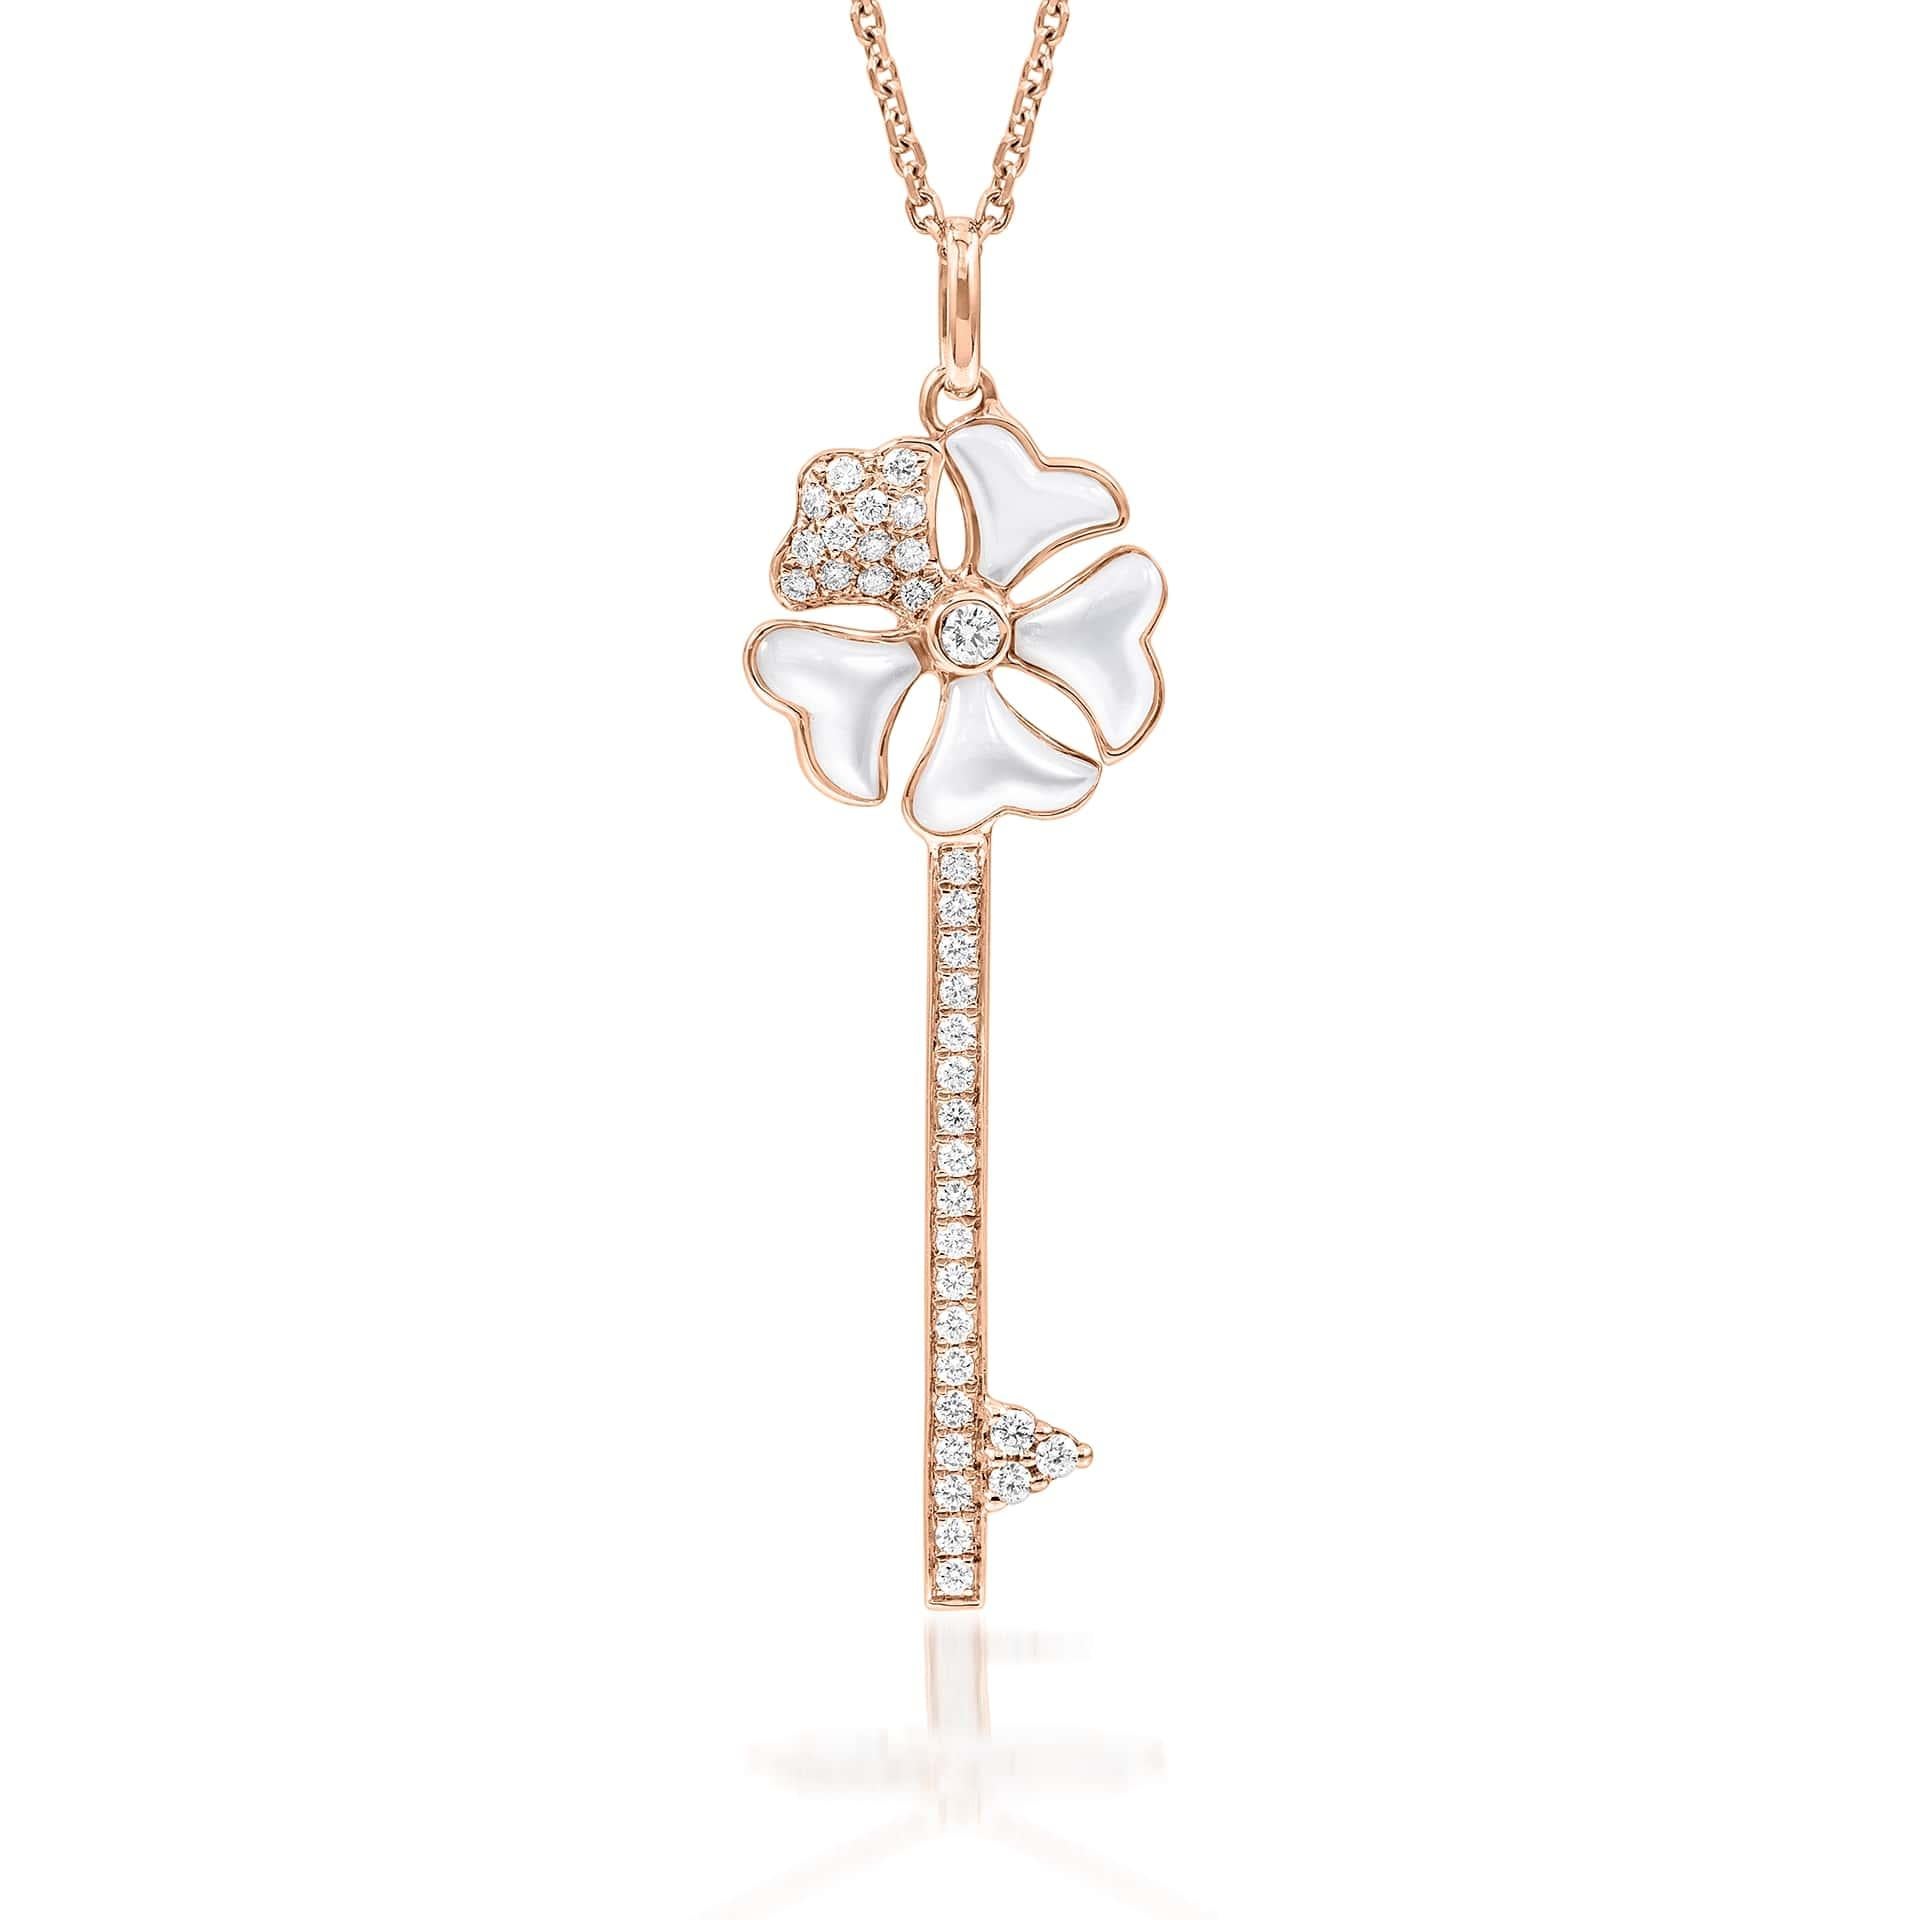 Bloom Diamond and Mother-of-Pearl Key Necklace in 18K Rose Gold

Inspired by the exquisite petals of the alpine cinquefoil flower, the Bloom collection combines the richness of diamonds and precious metals with the light versatility of this